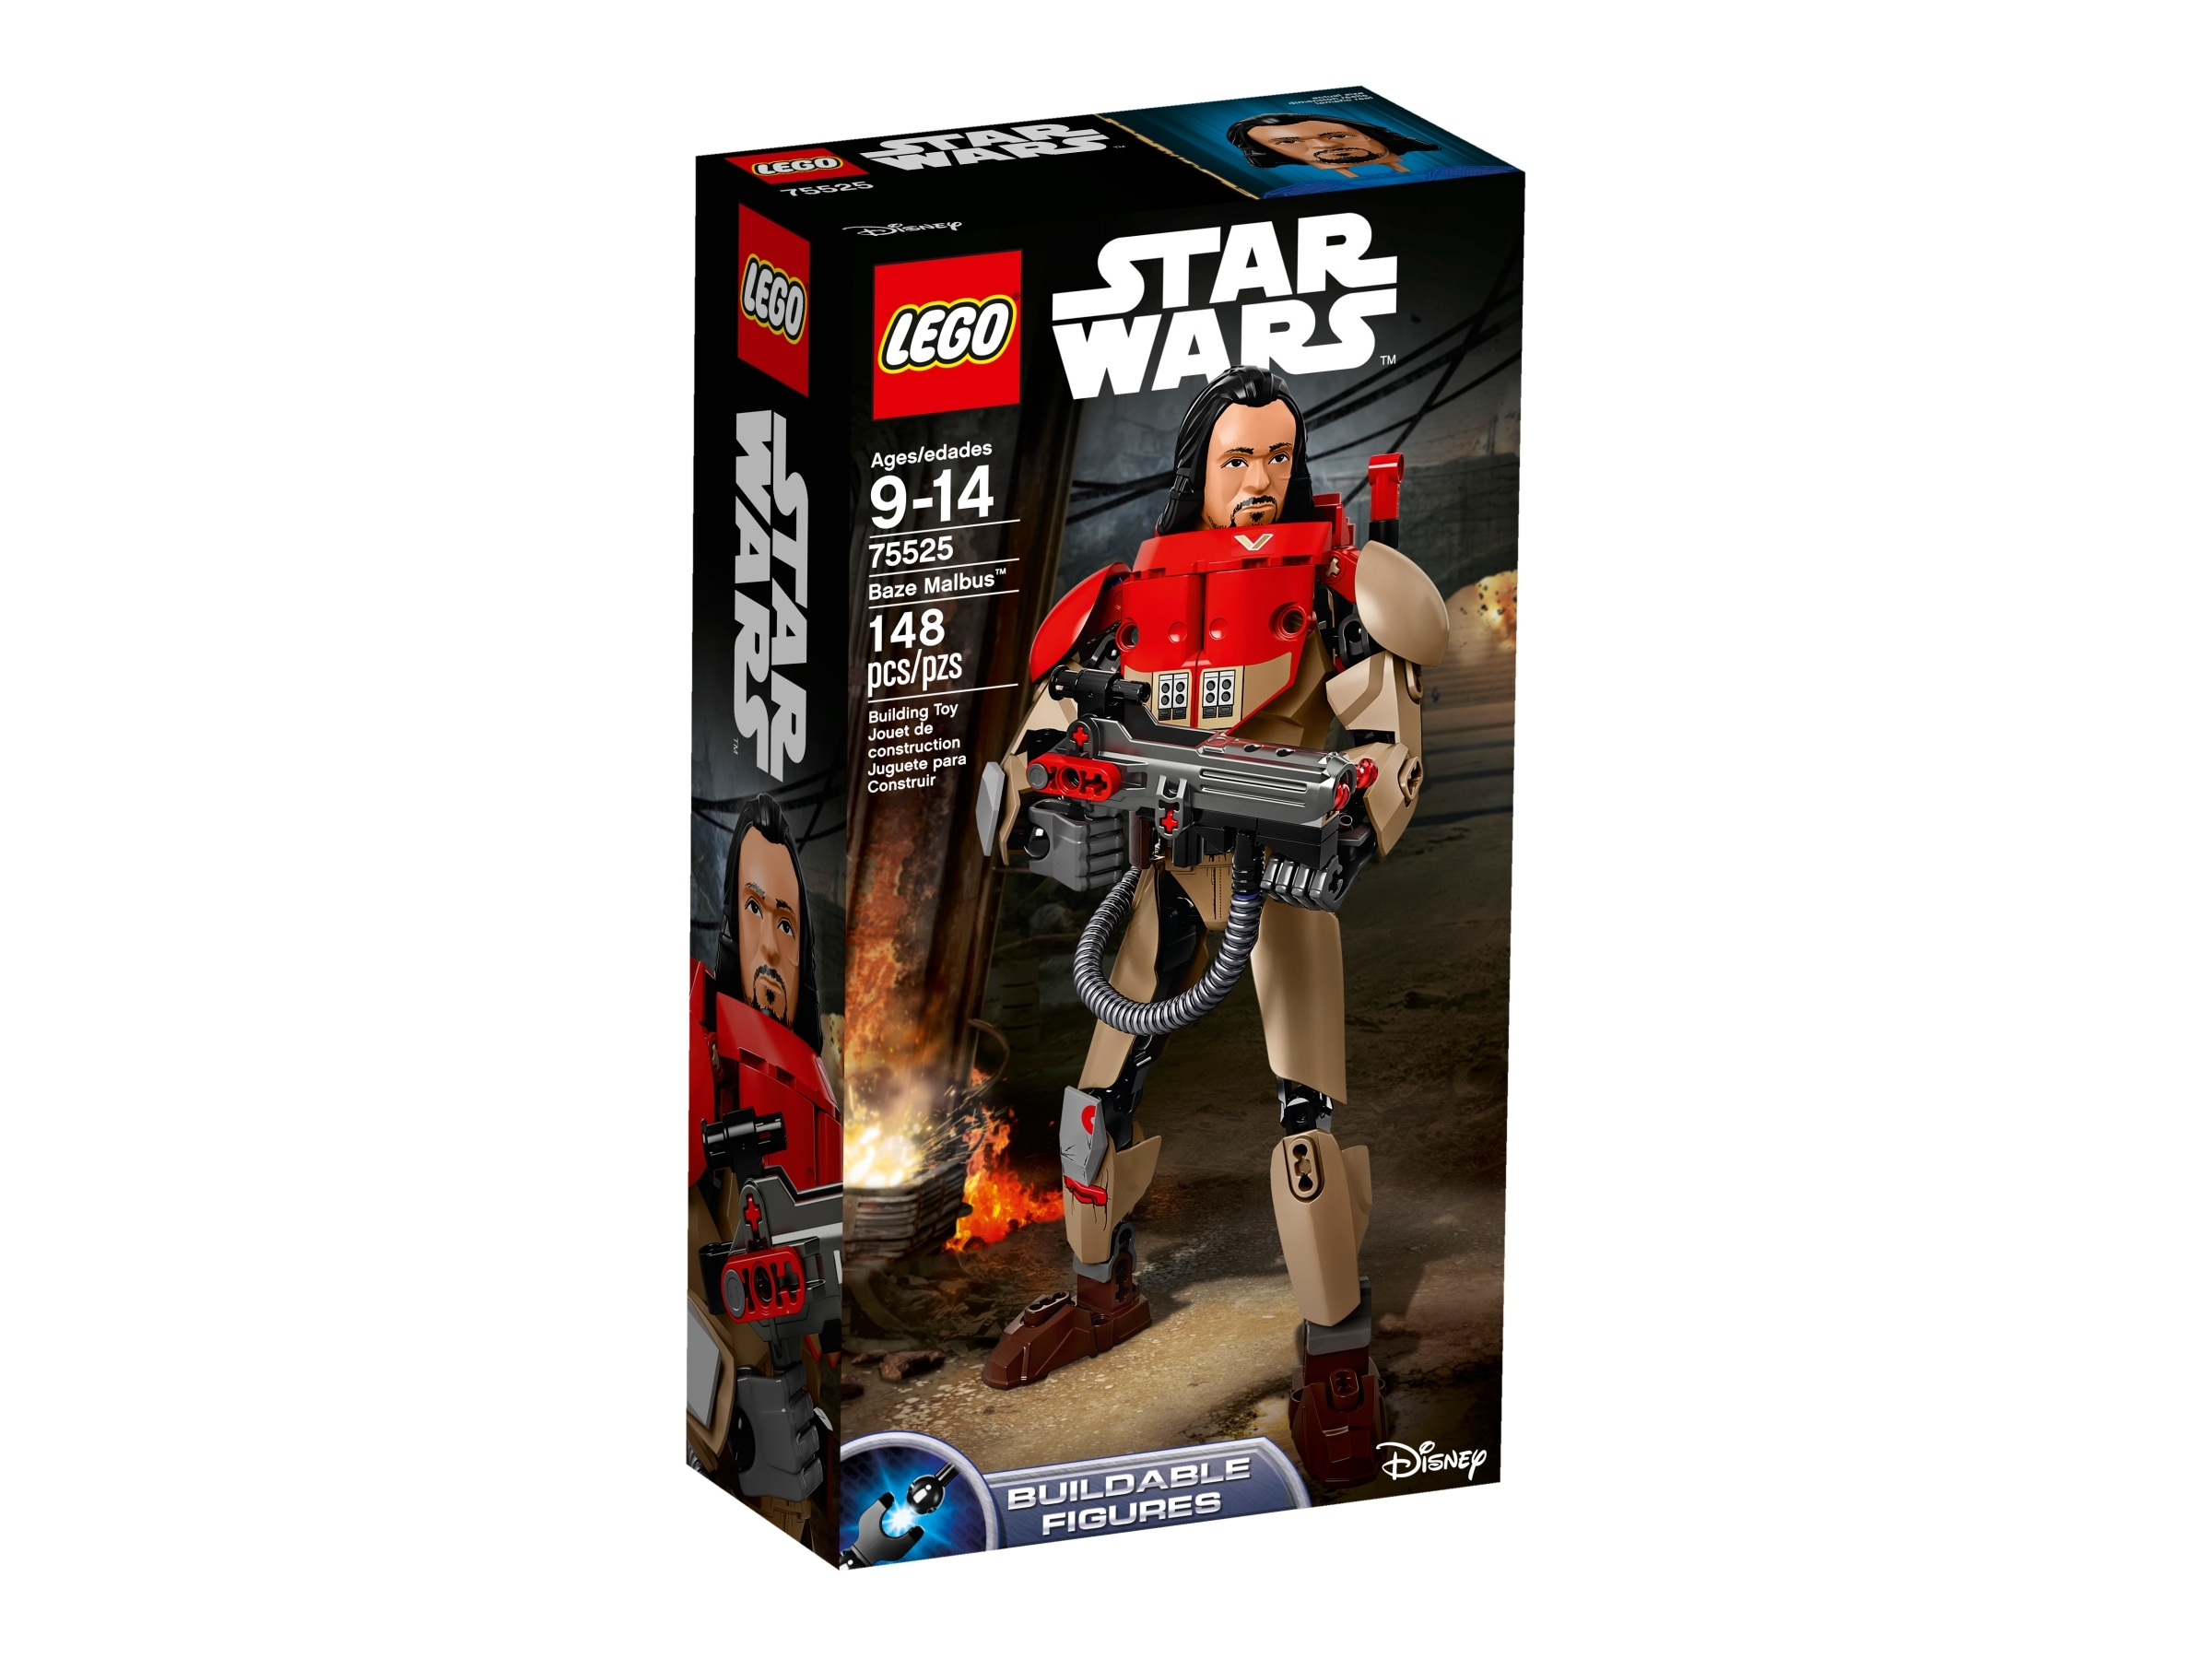 Star Wars NEW Details about   Lego #75525 ROGUE ONE BAZE MALBUS MISB Buildable Figure SEALED